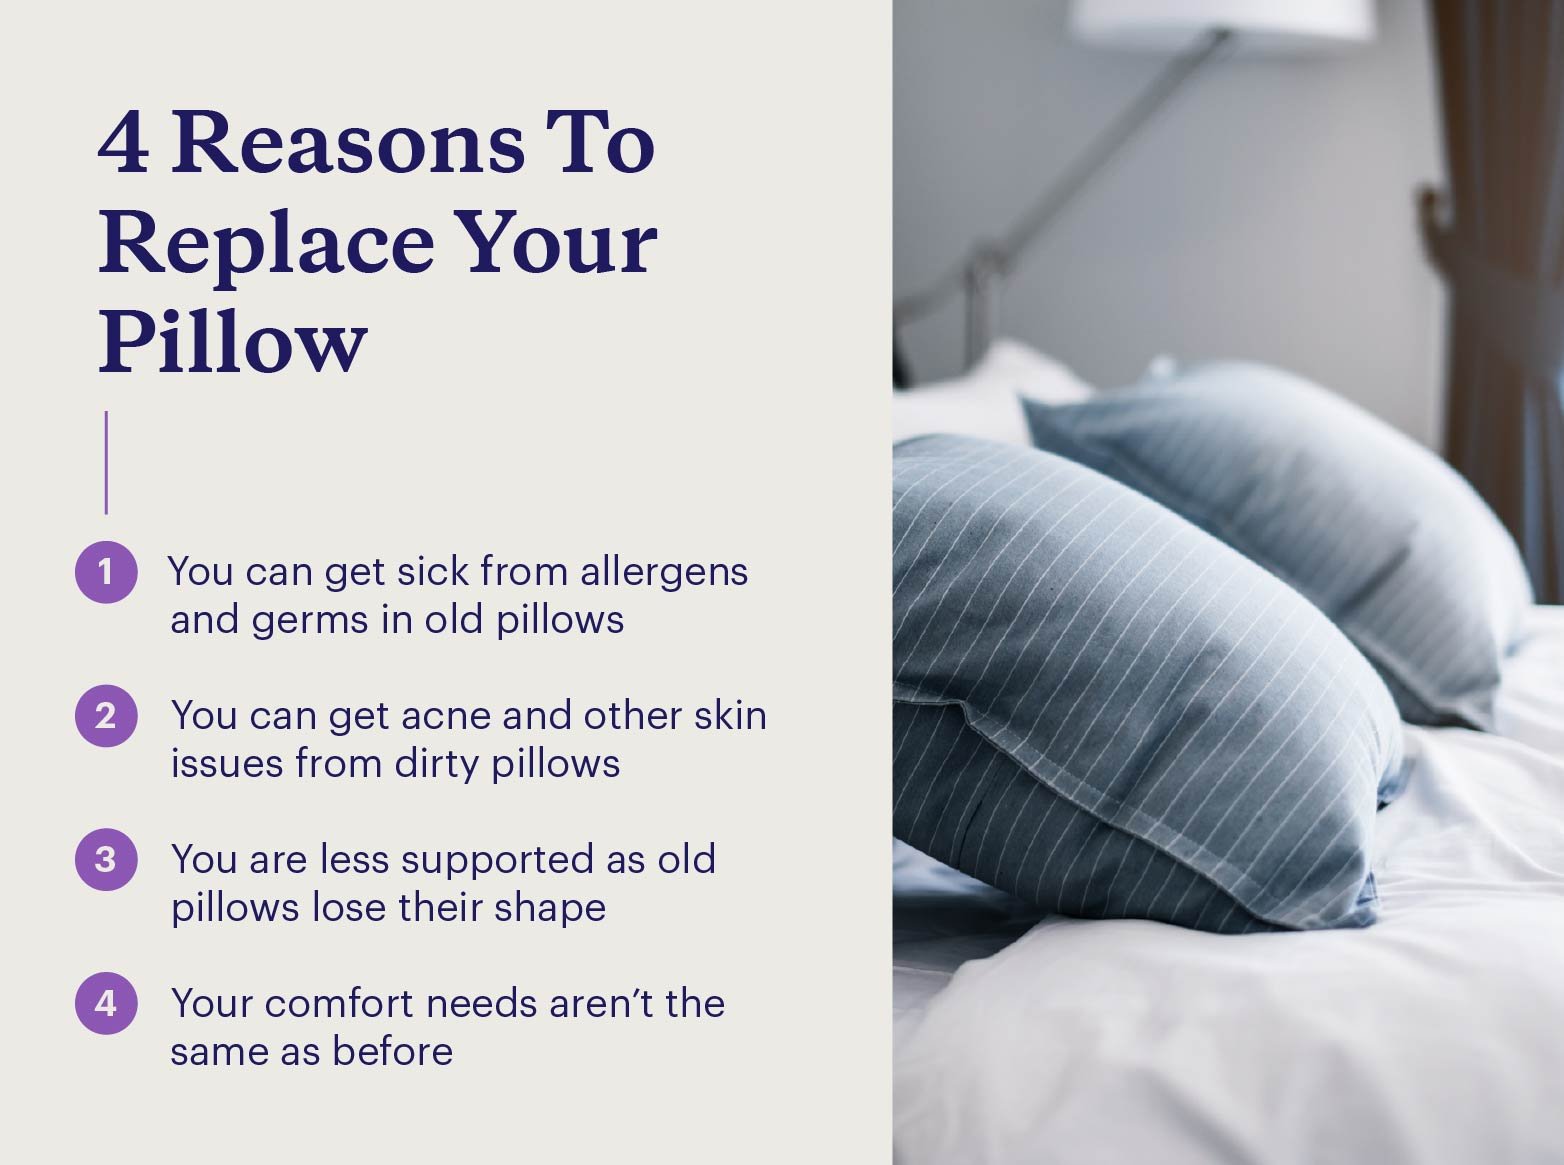 When Should You Replace Your Pillows?